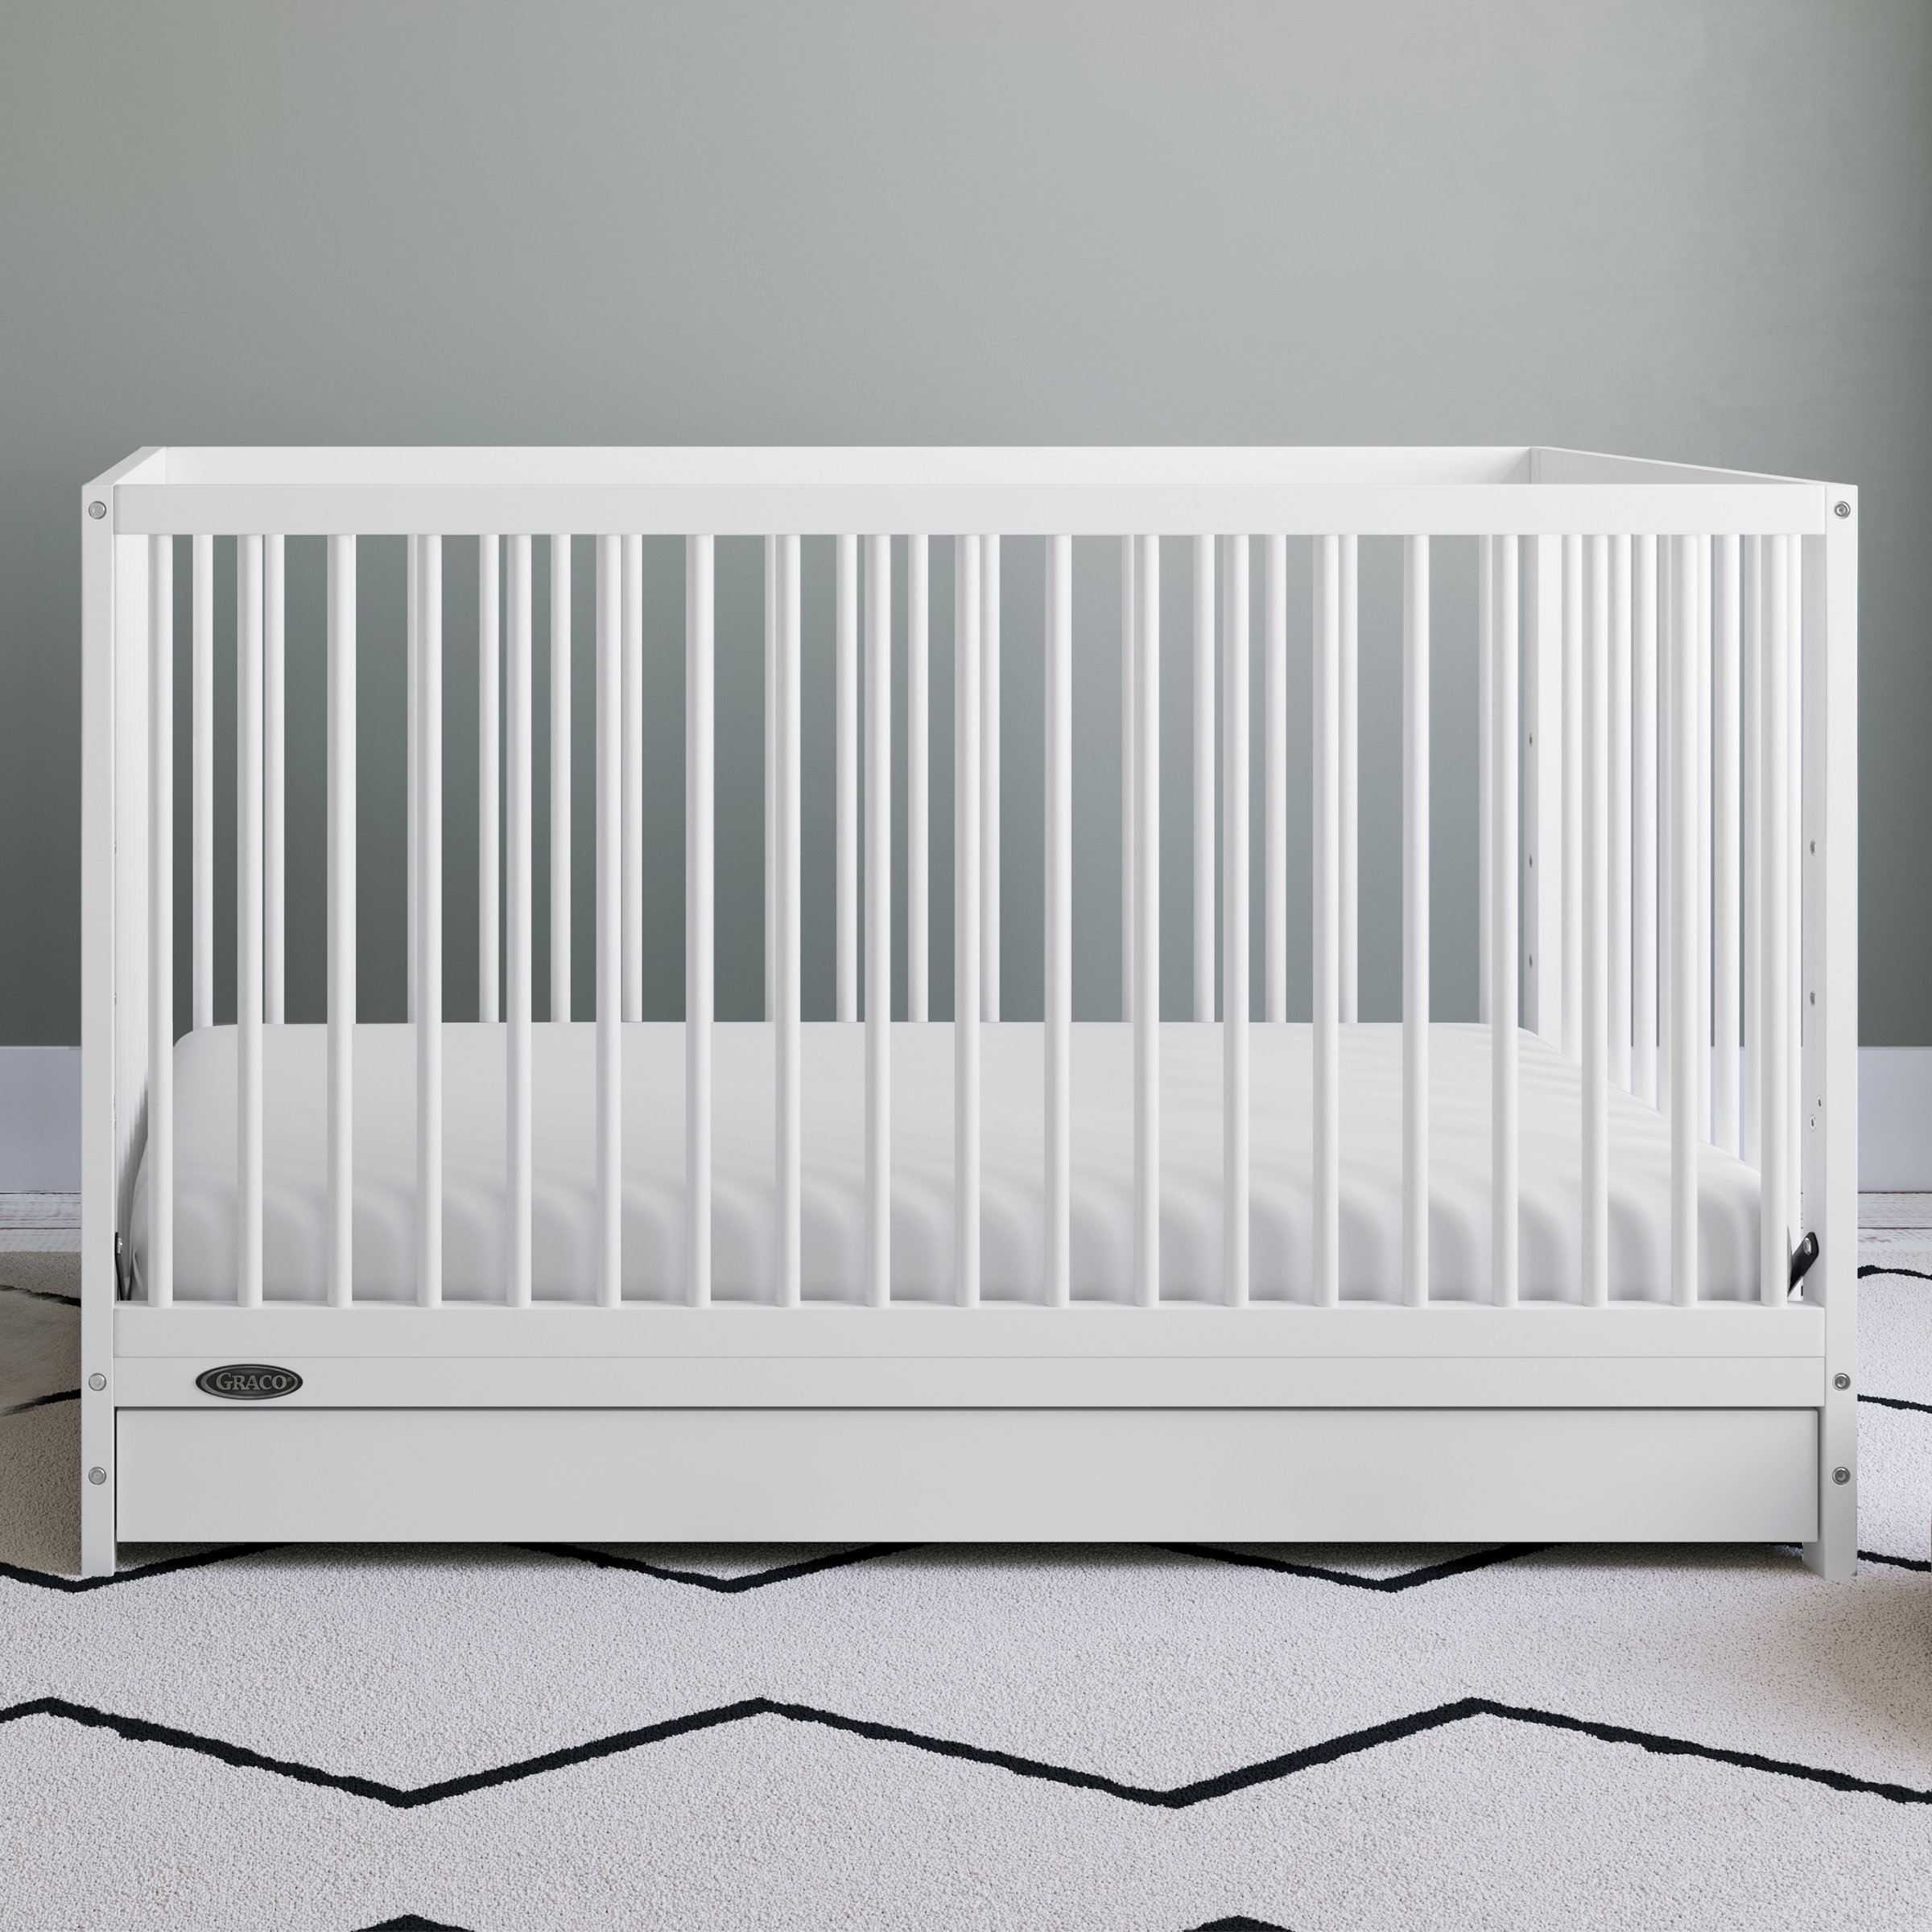 Graco Teddi 5-in-1 Convertible Baby Crib with Drawer, White - image 3 of 15